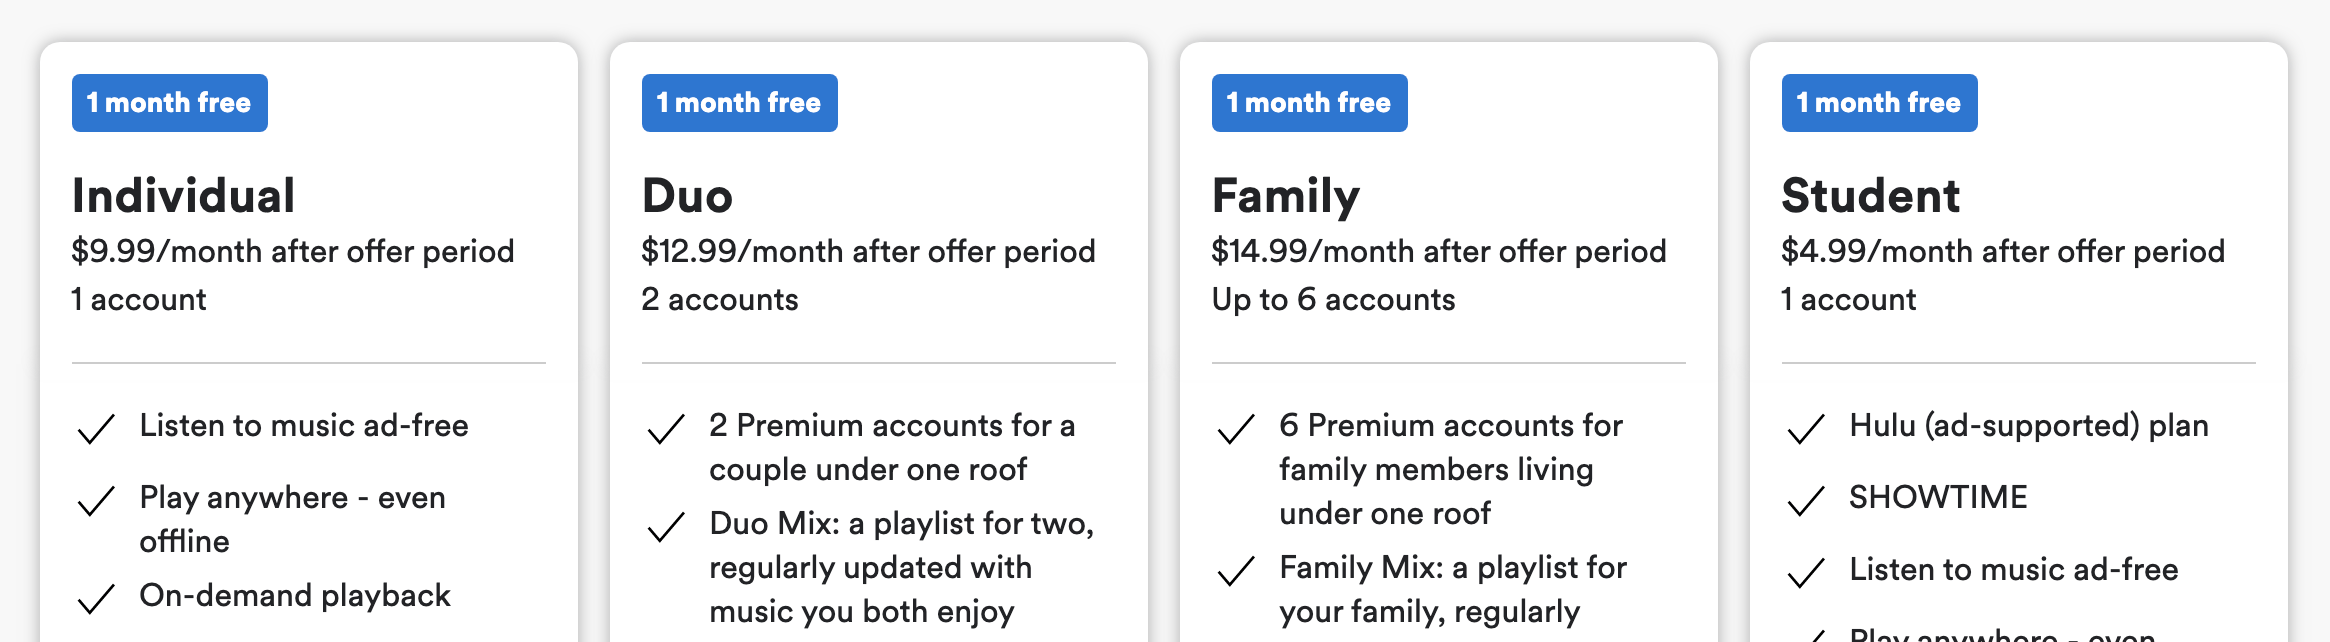 pricing page for Spotify